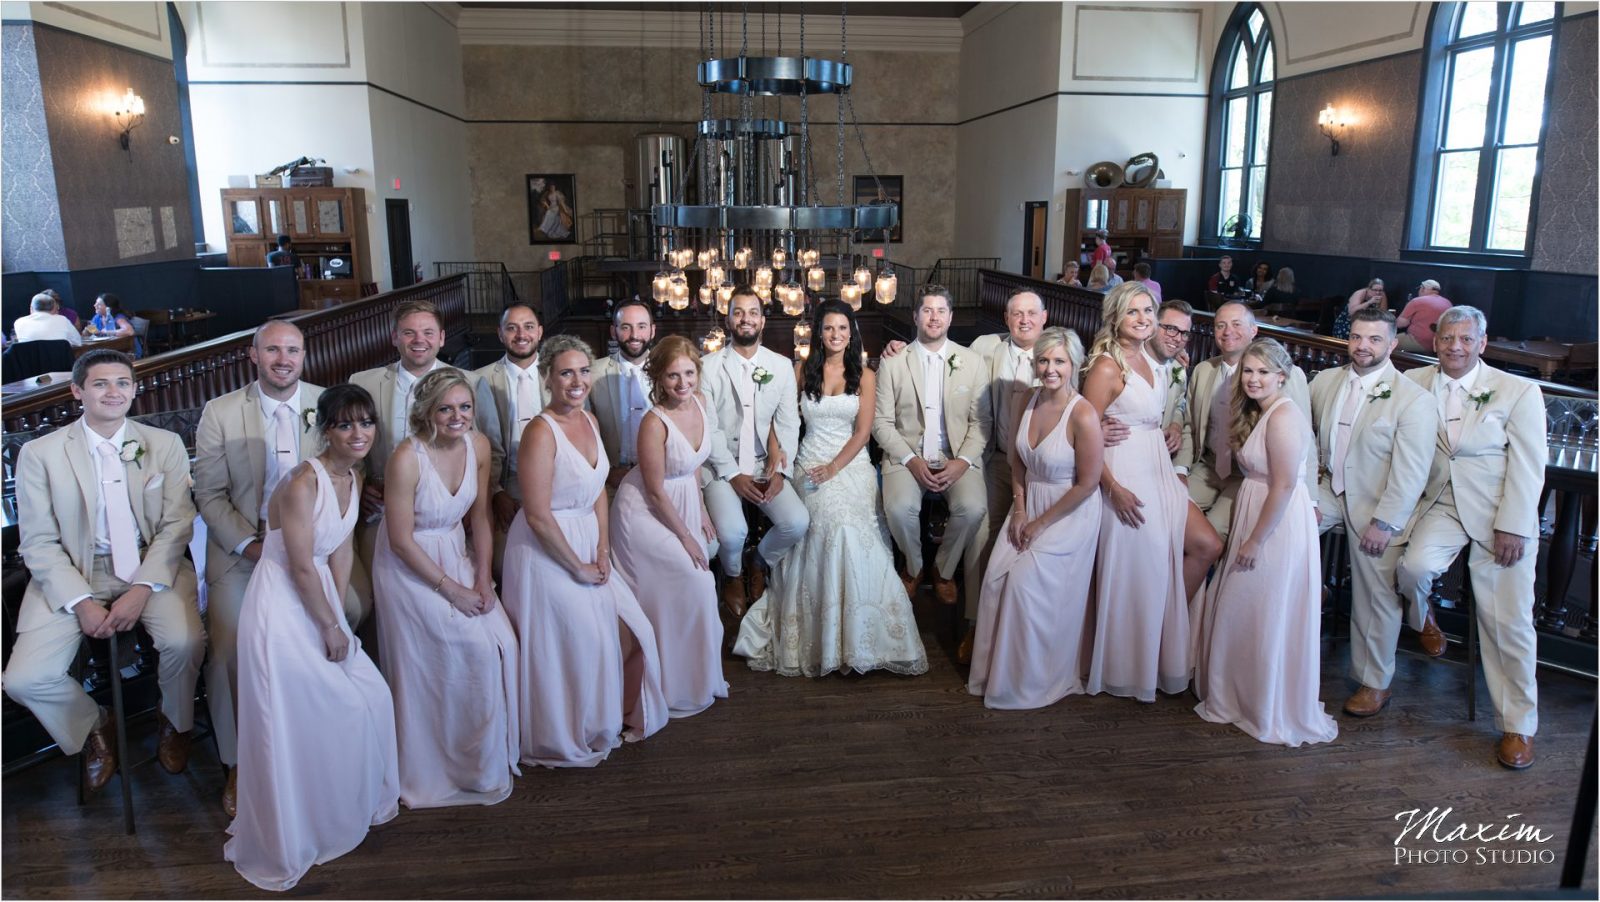 Taft Ale House wedding picture